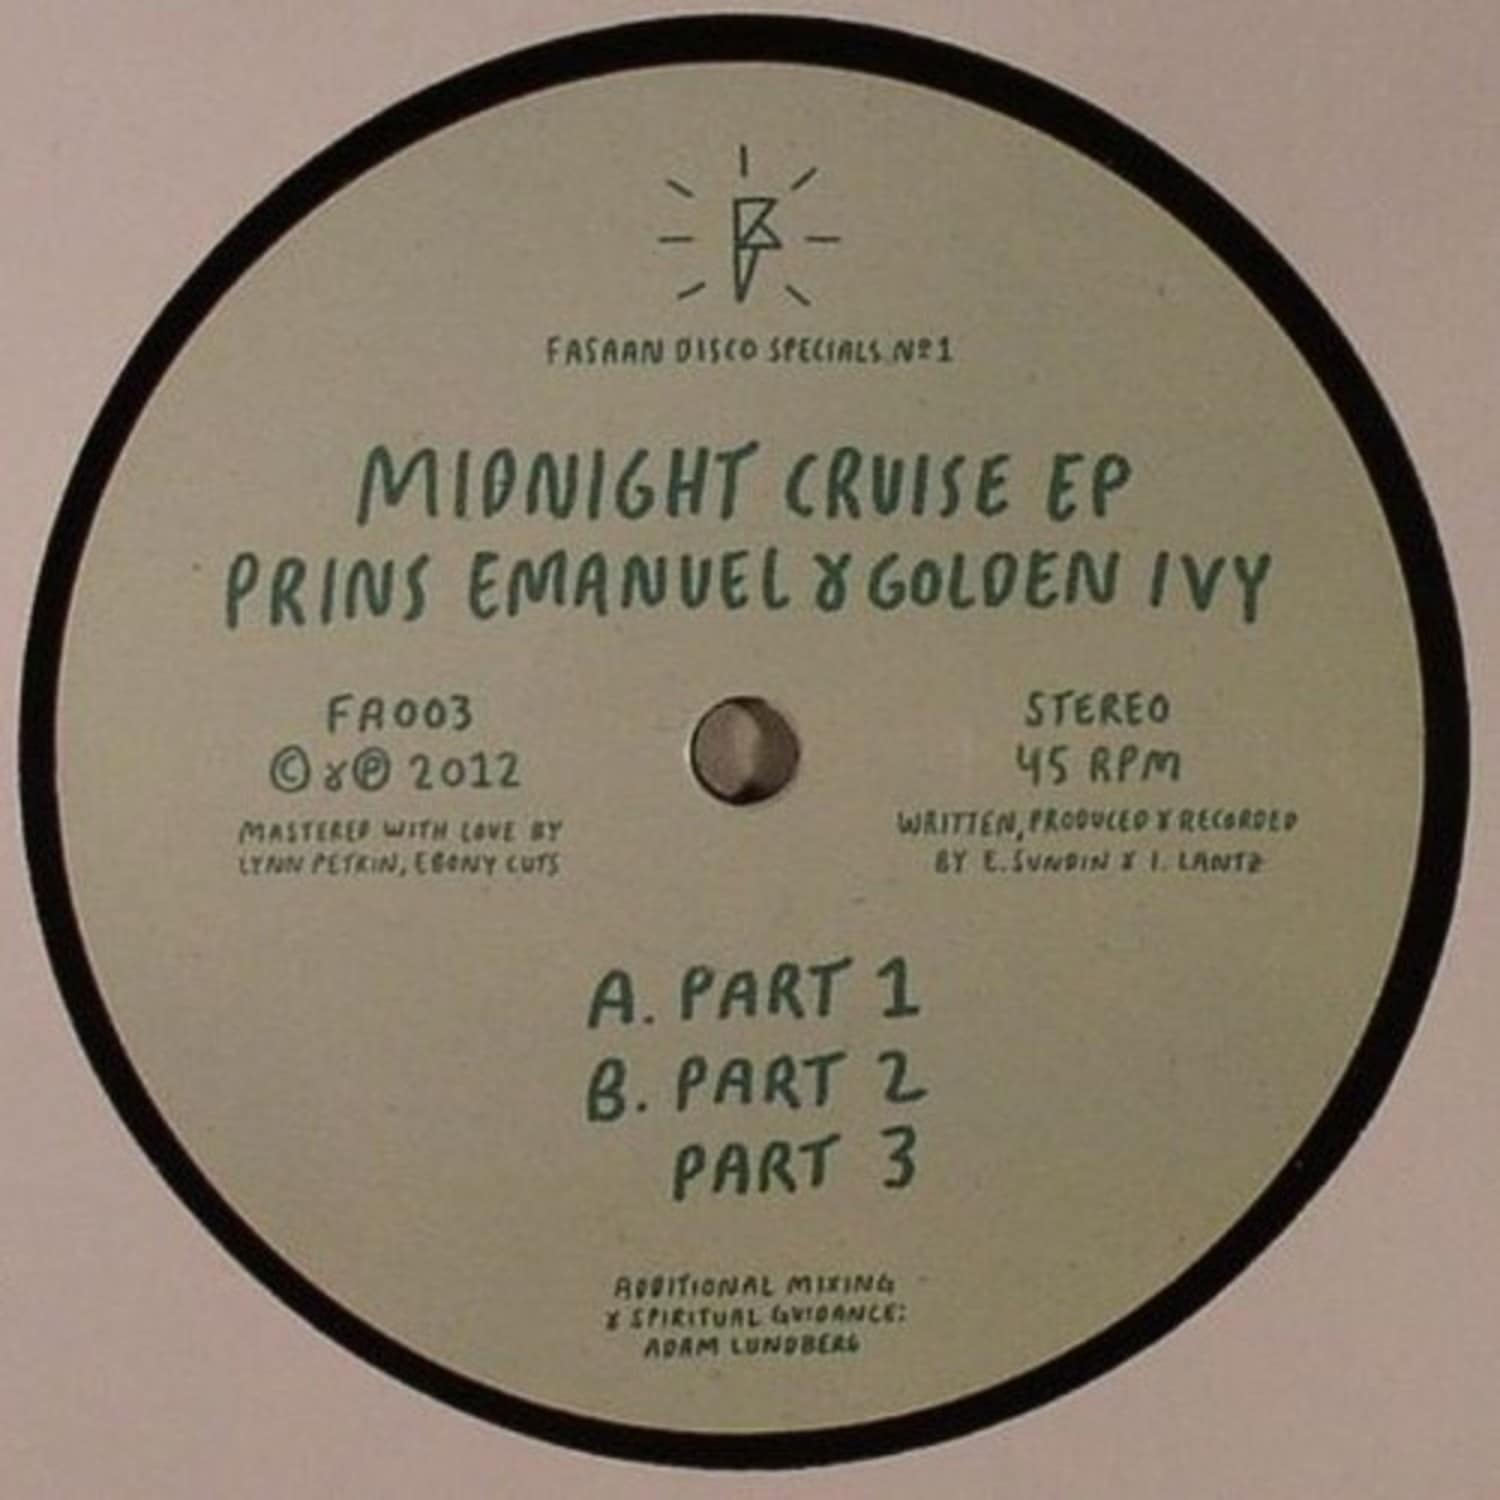 Prins Emanuel & Golden Ivy - THE MIDNIGHT CRUISE EP